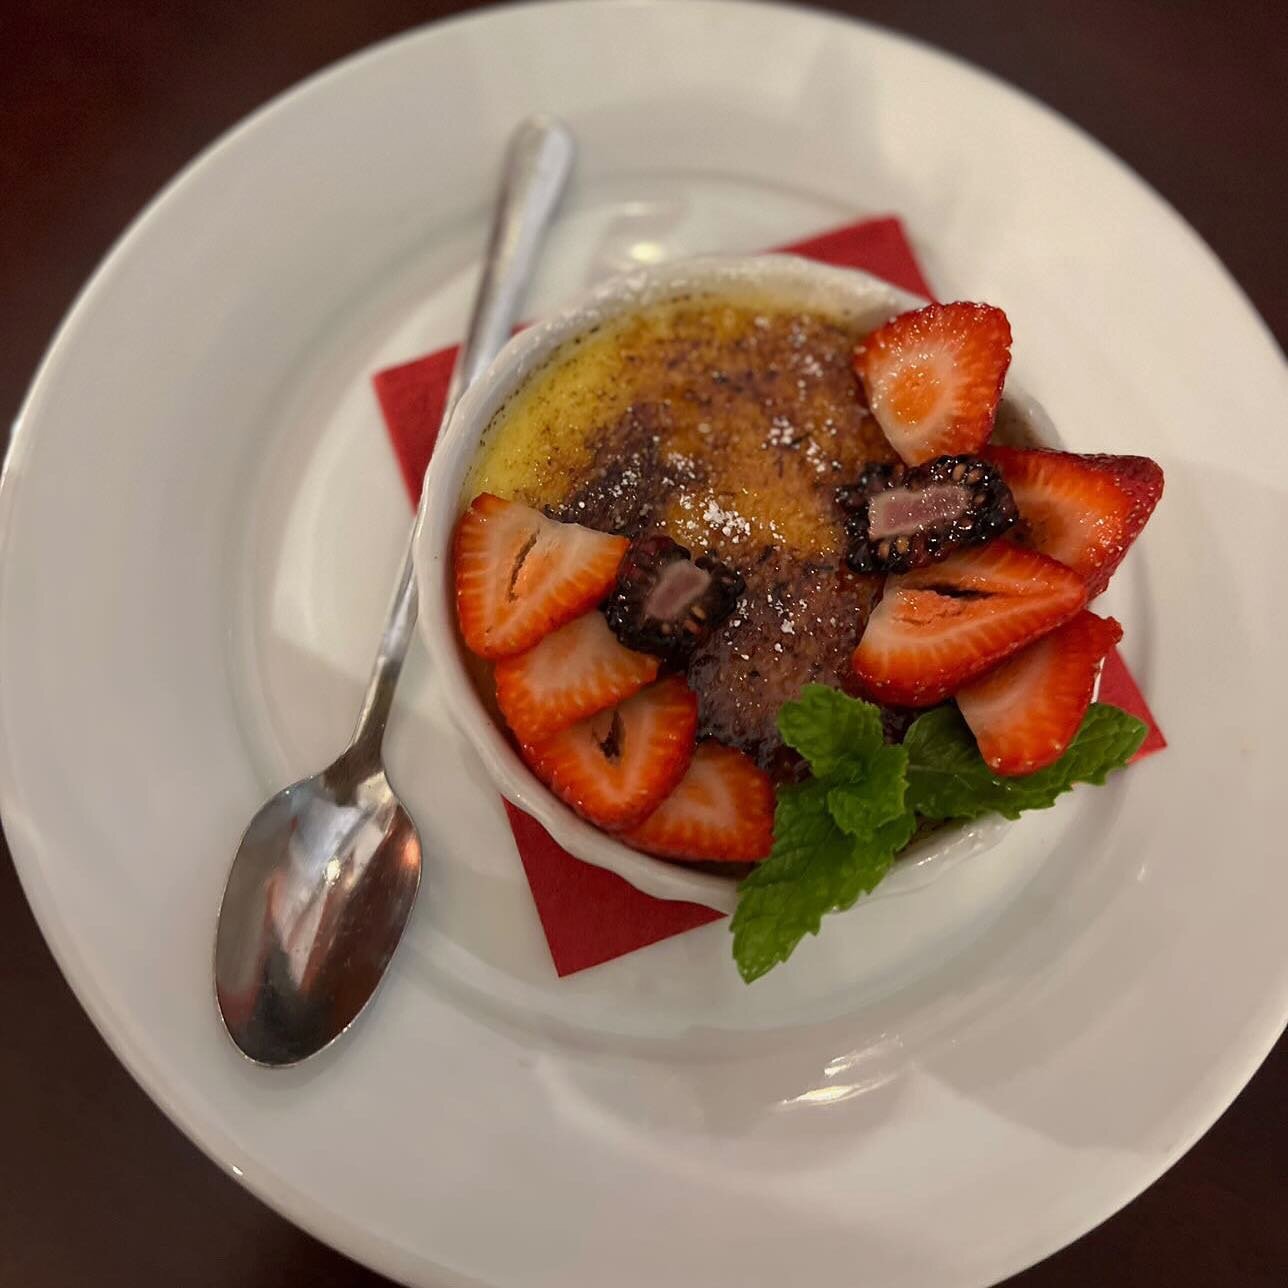 It&rsquo;s the start of the weekend and you deserve to treat yourself to one of our delicious Cr&egrave;me Br&ucirc;l&eacute;e 🤩🥳 #cremebrulee #enginecono28 #engineno28 #dtla #dtlafoodie #dtlarestaurant